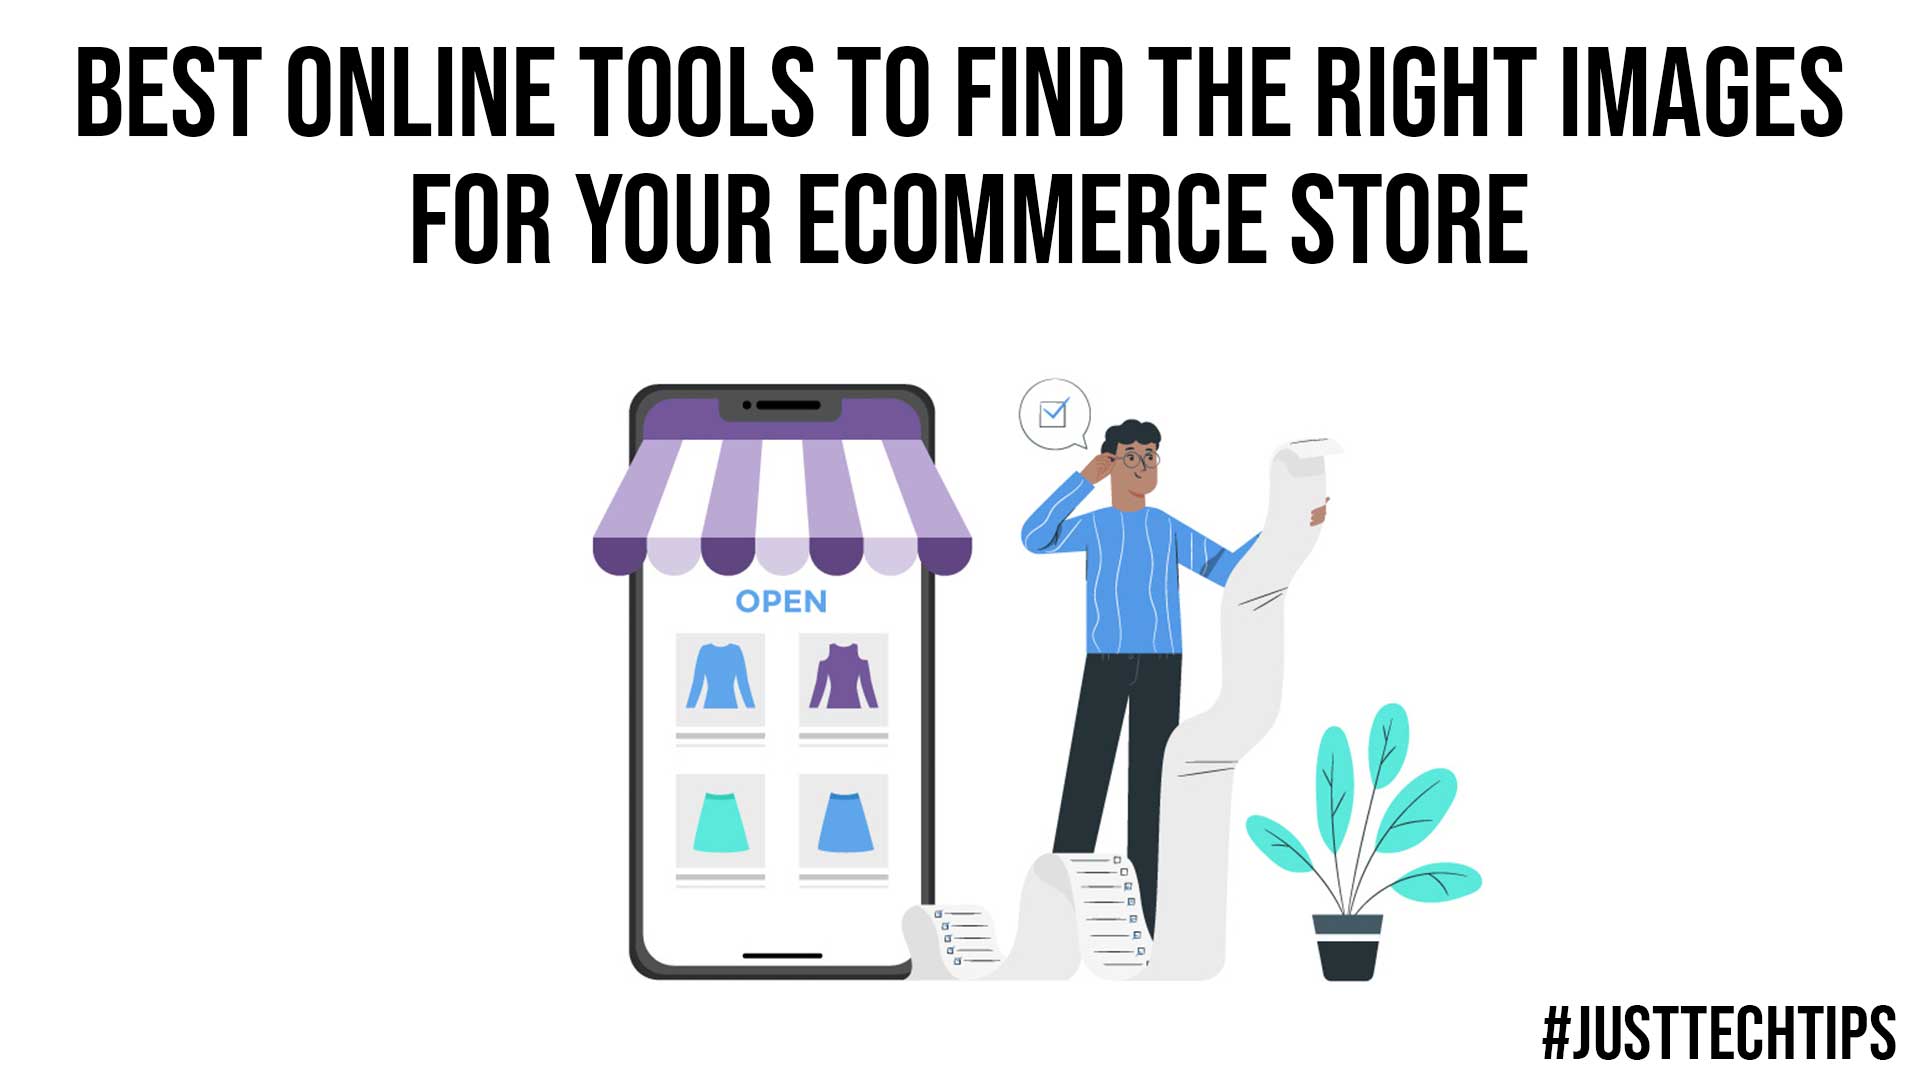 Best Online Tools To Find The Right Images For Your eCommerce Store